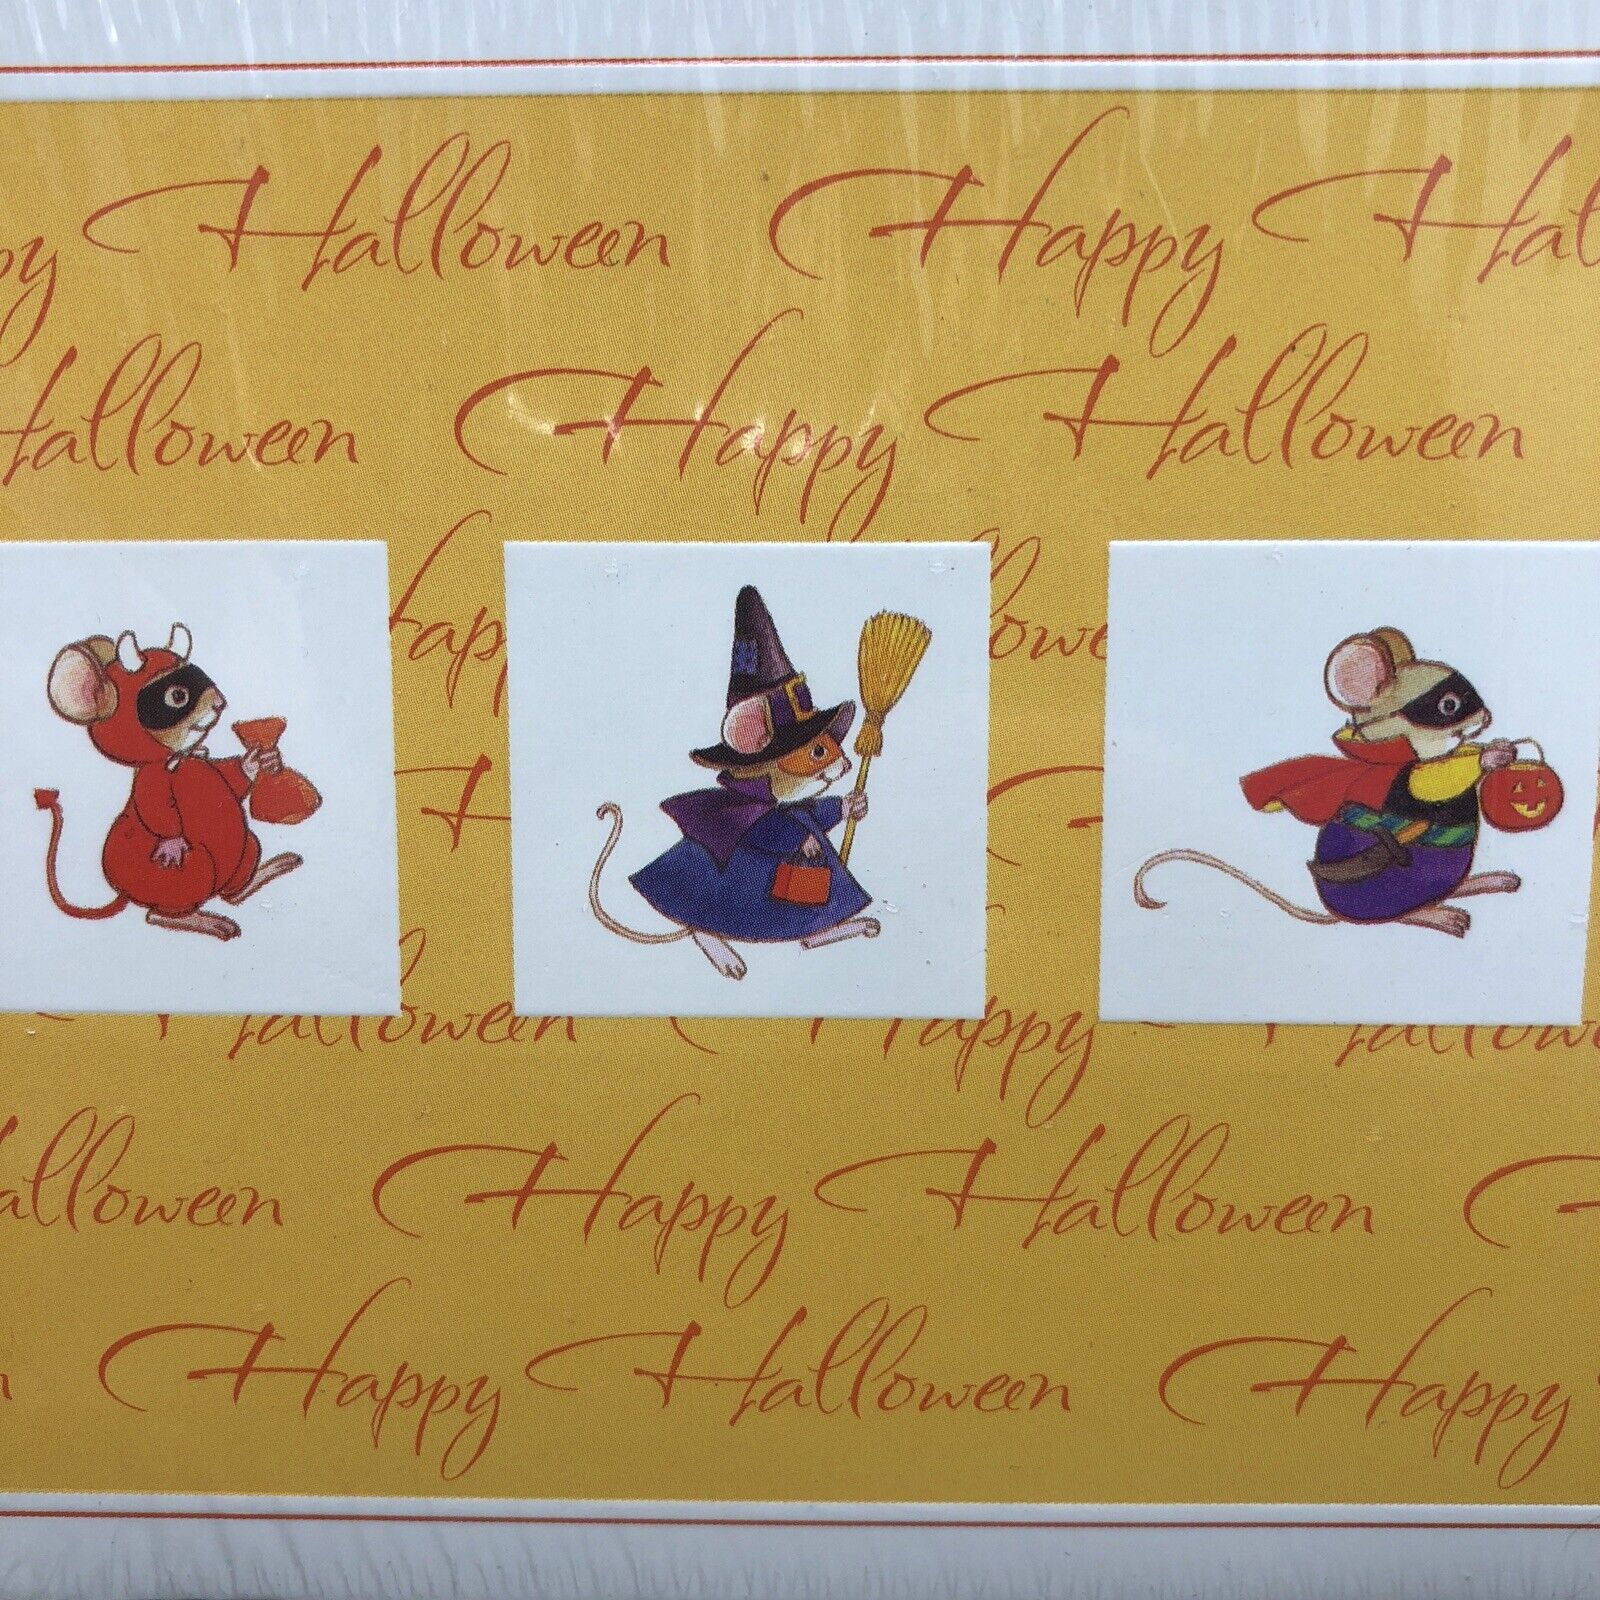 American Greetings Mouse Halloween Cards Vintage Early 2000s New In Pack 8 Cards